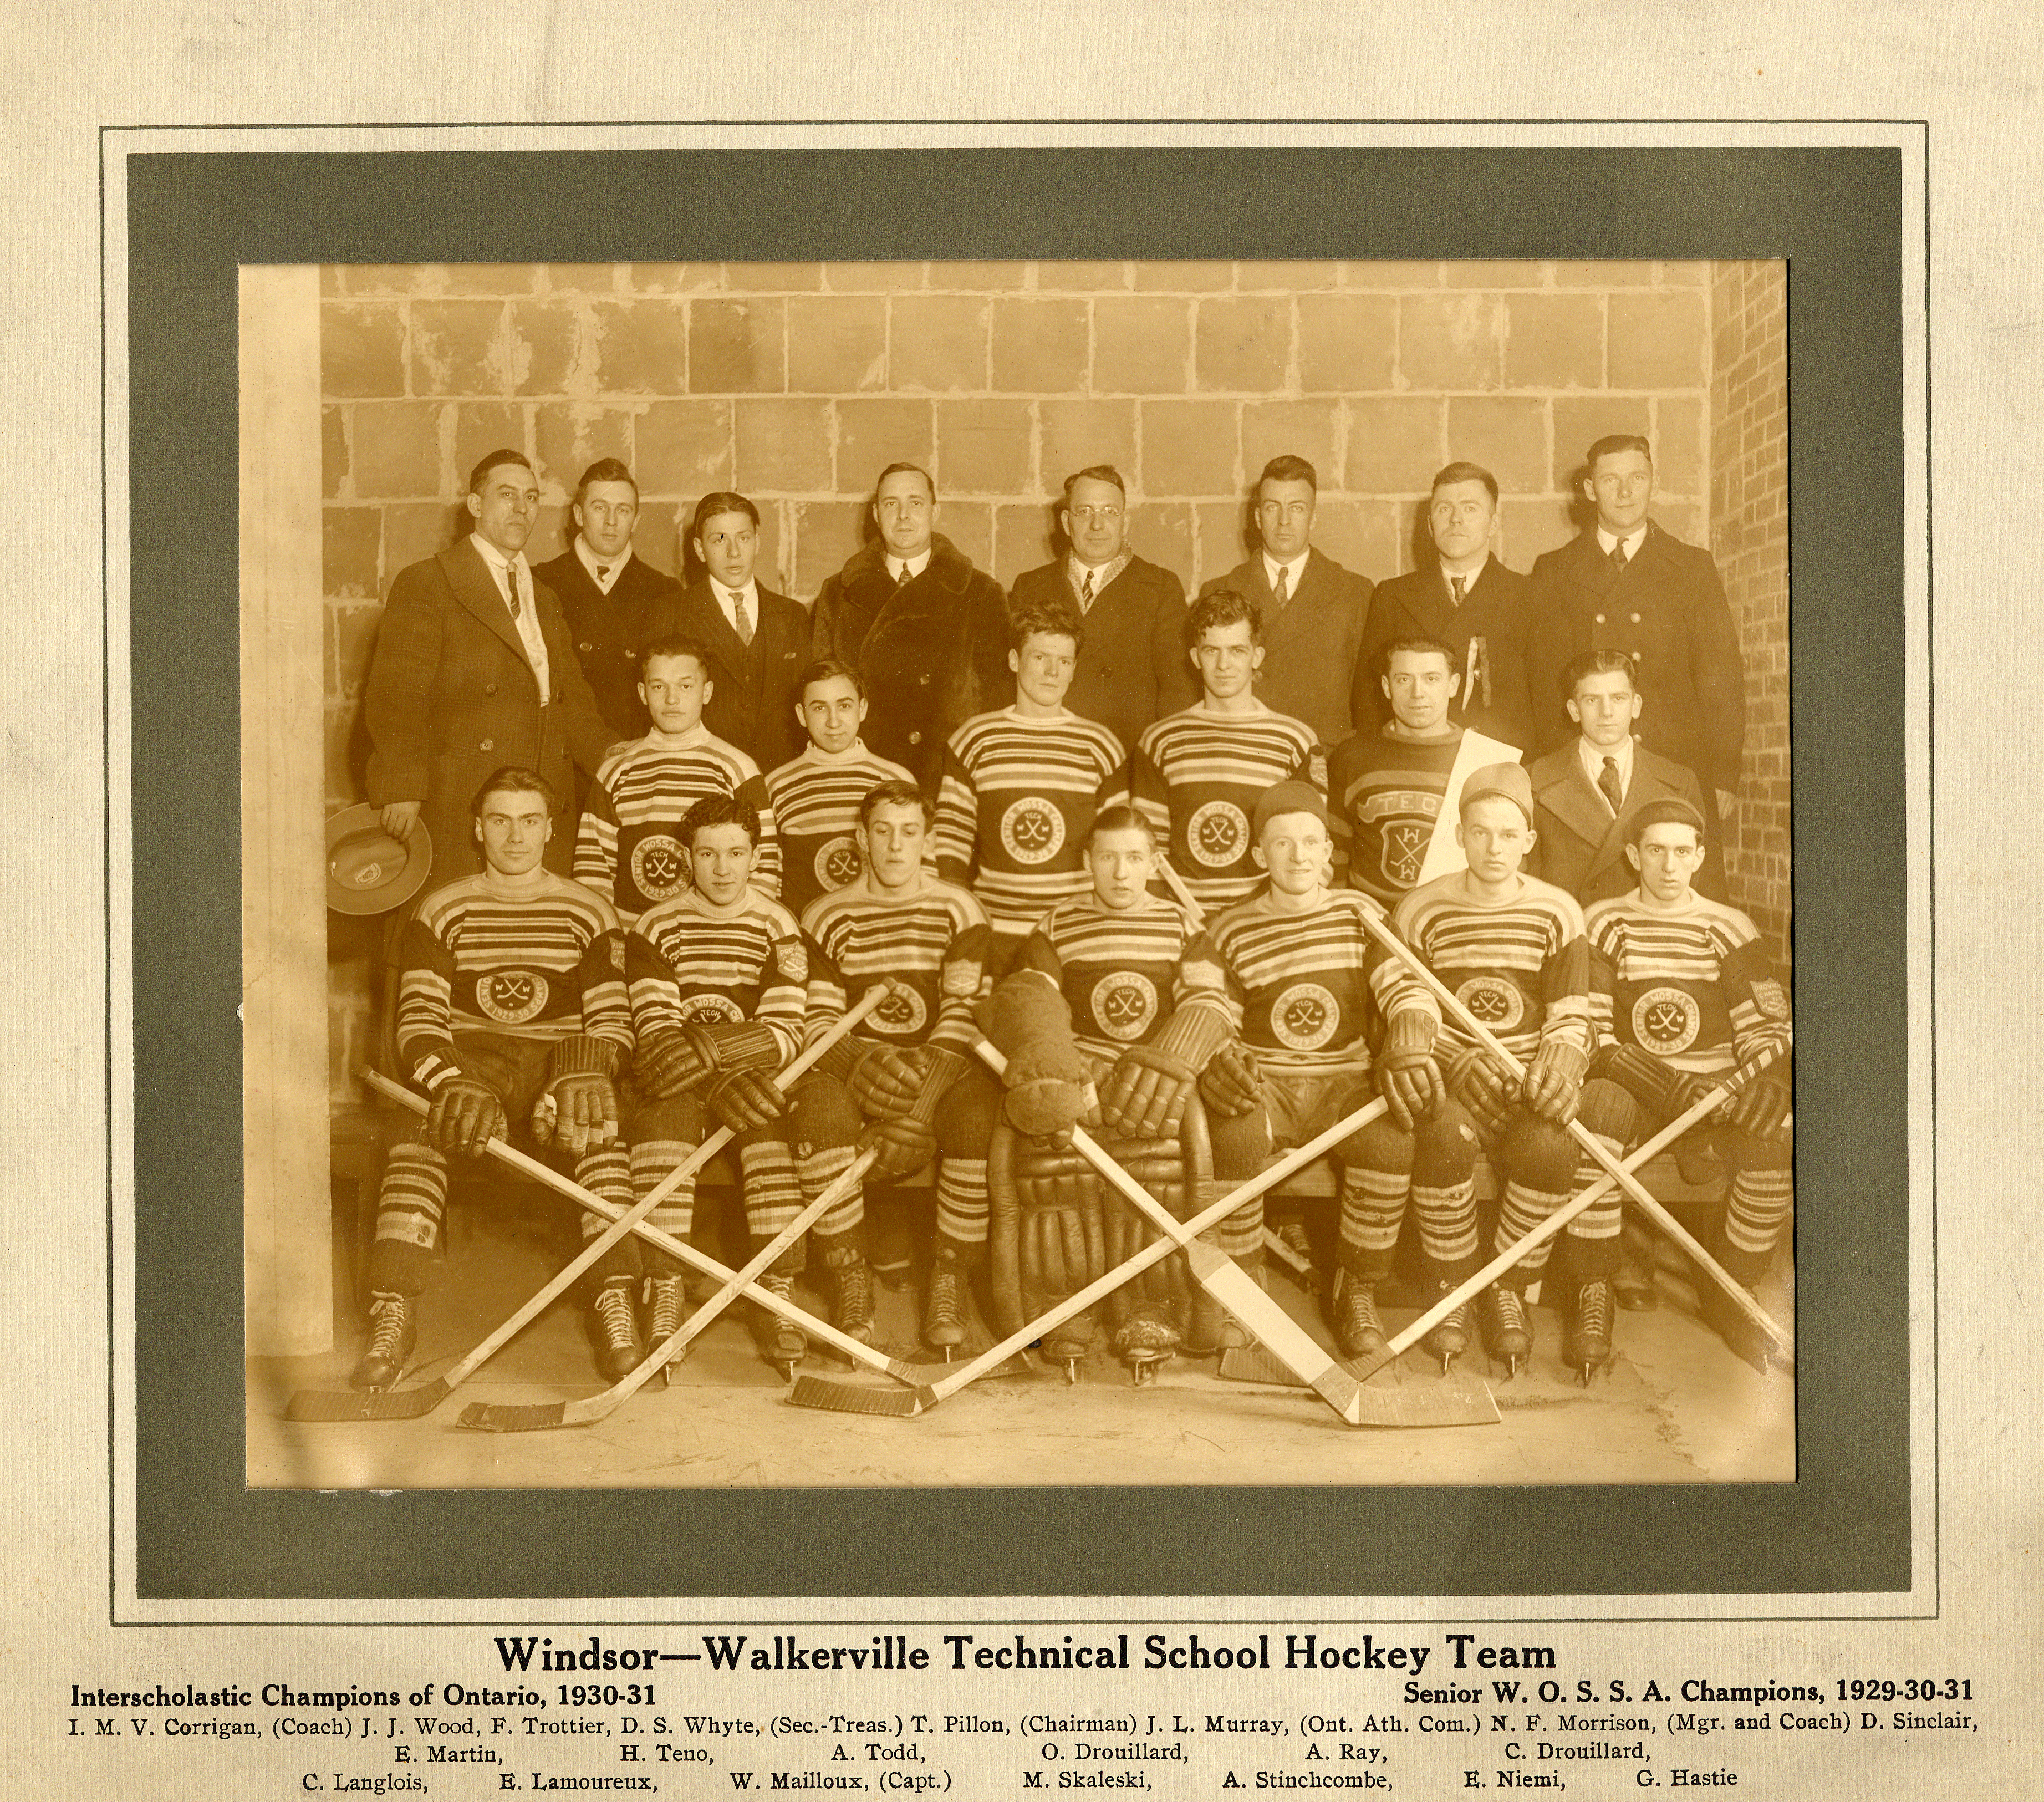 Black%20and%20white%20photograph%20of%20the%201931%20Windsor-Walkerville%20Technical%20School%20Hockey%20Team